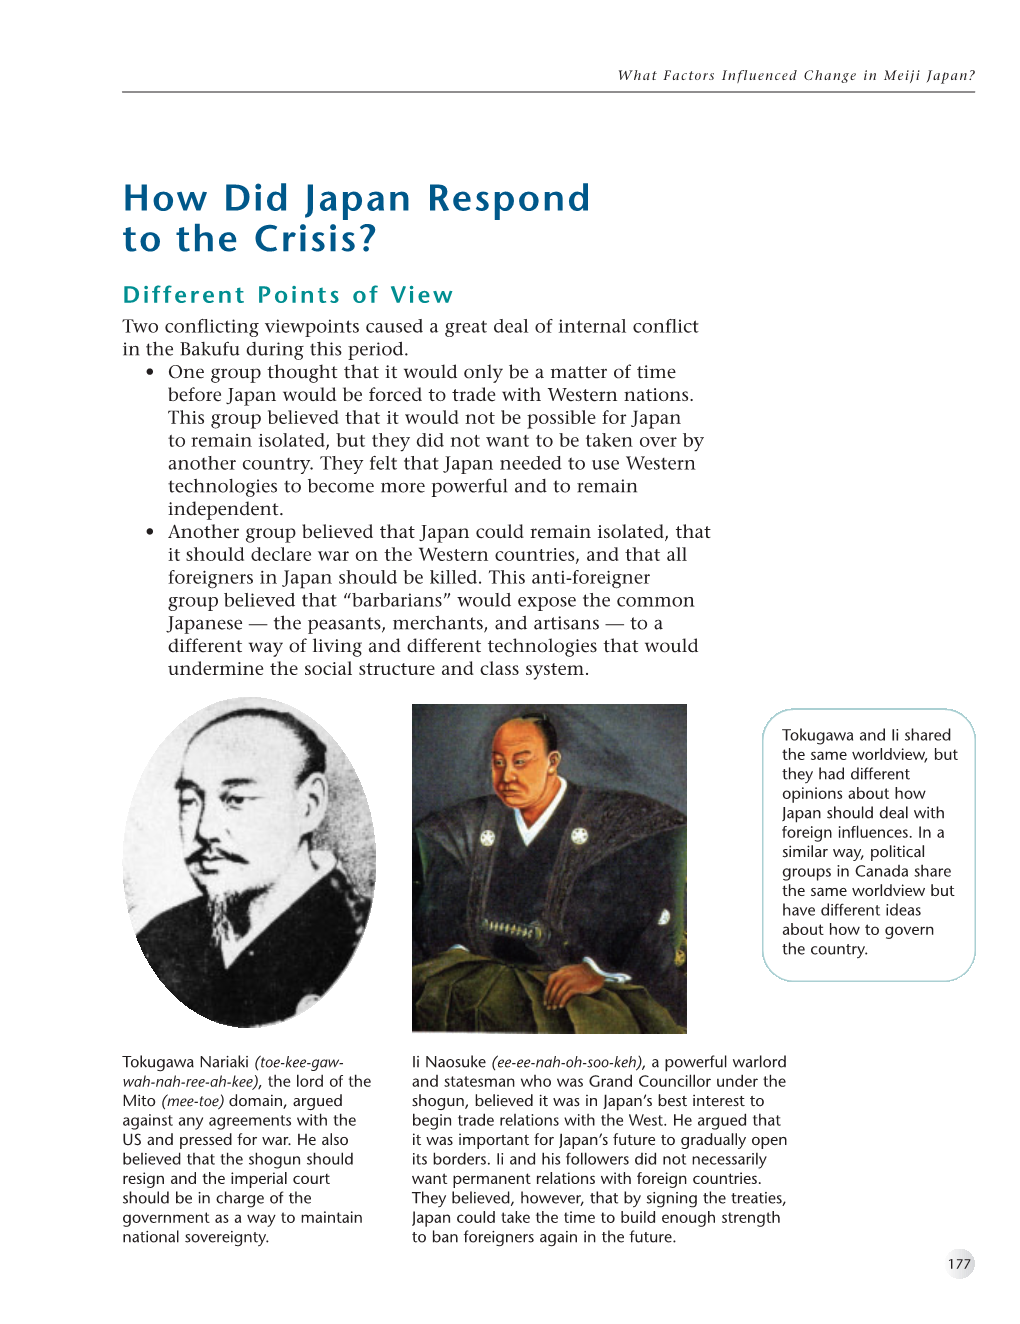 How Did Japan Respond to the Crisis?